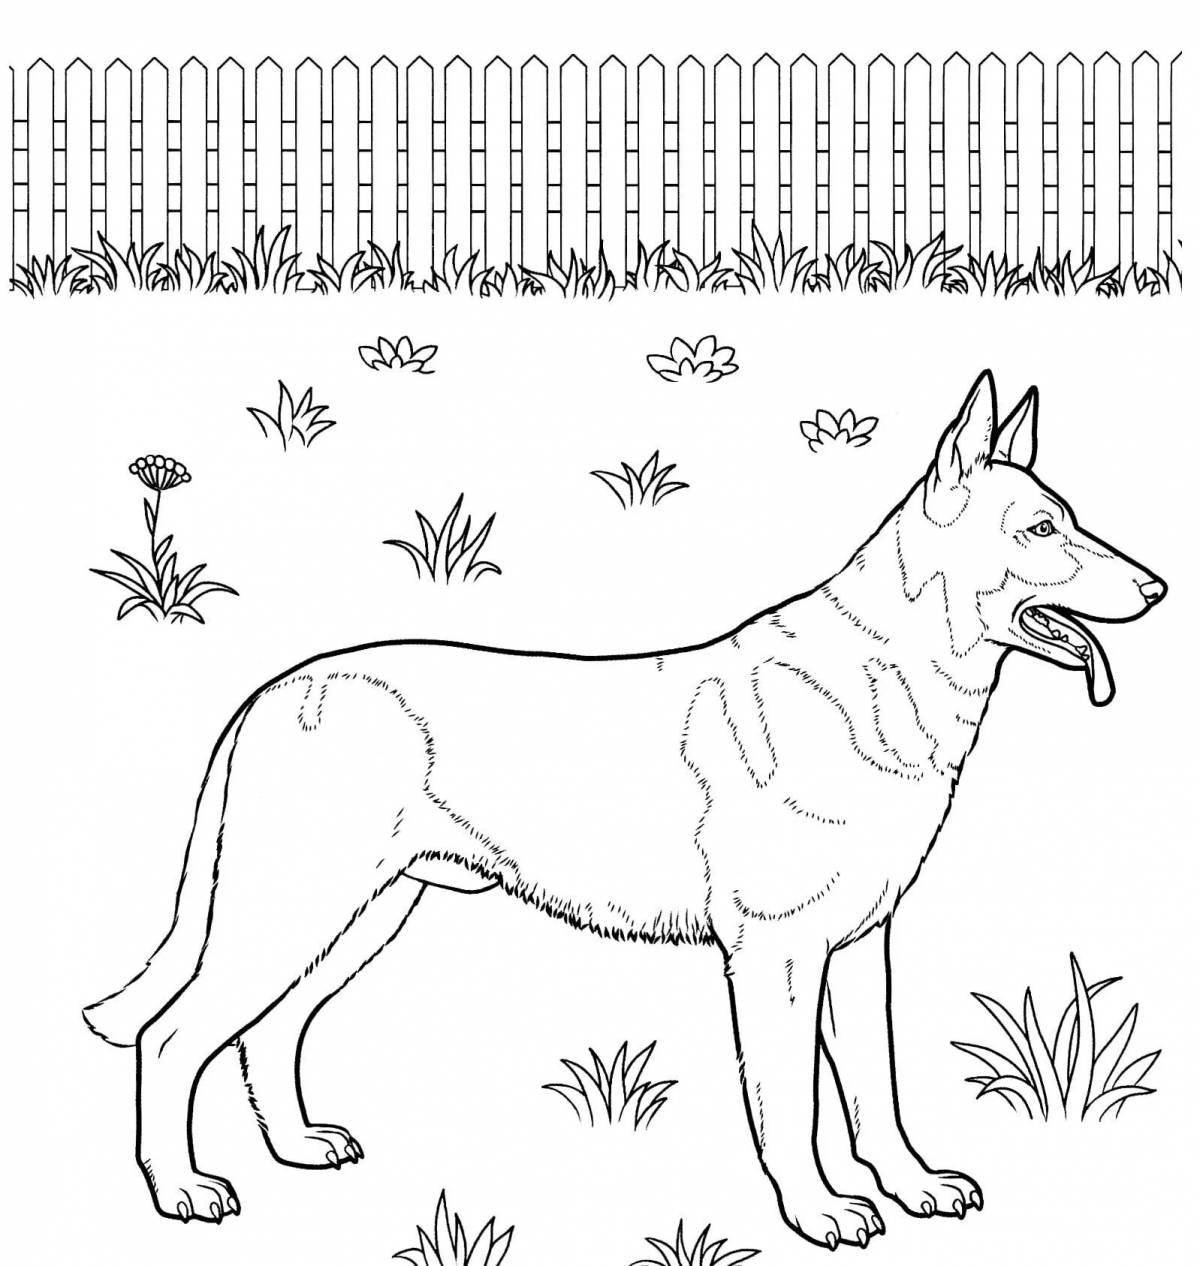 Outstanding Service Dogs Coloring Page for Kids